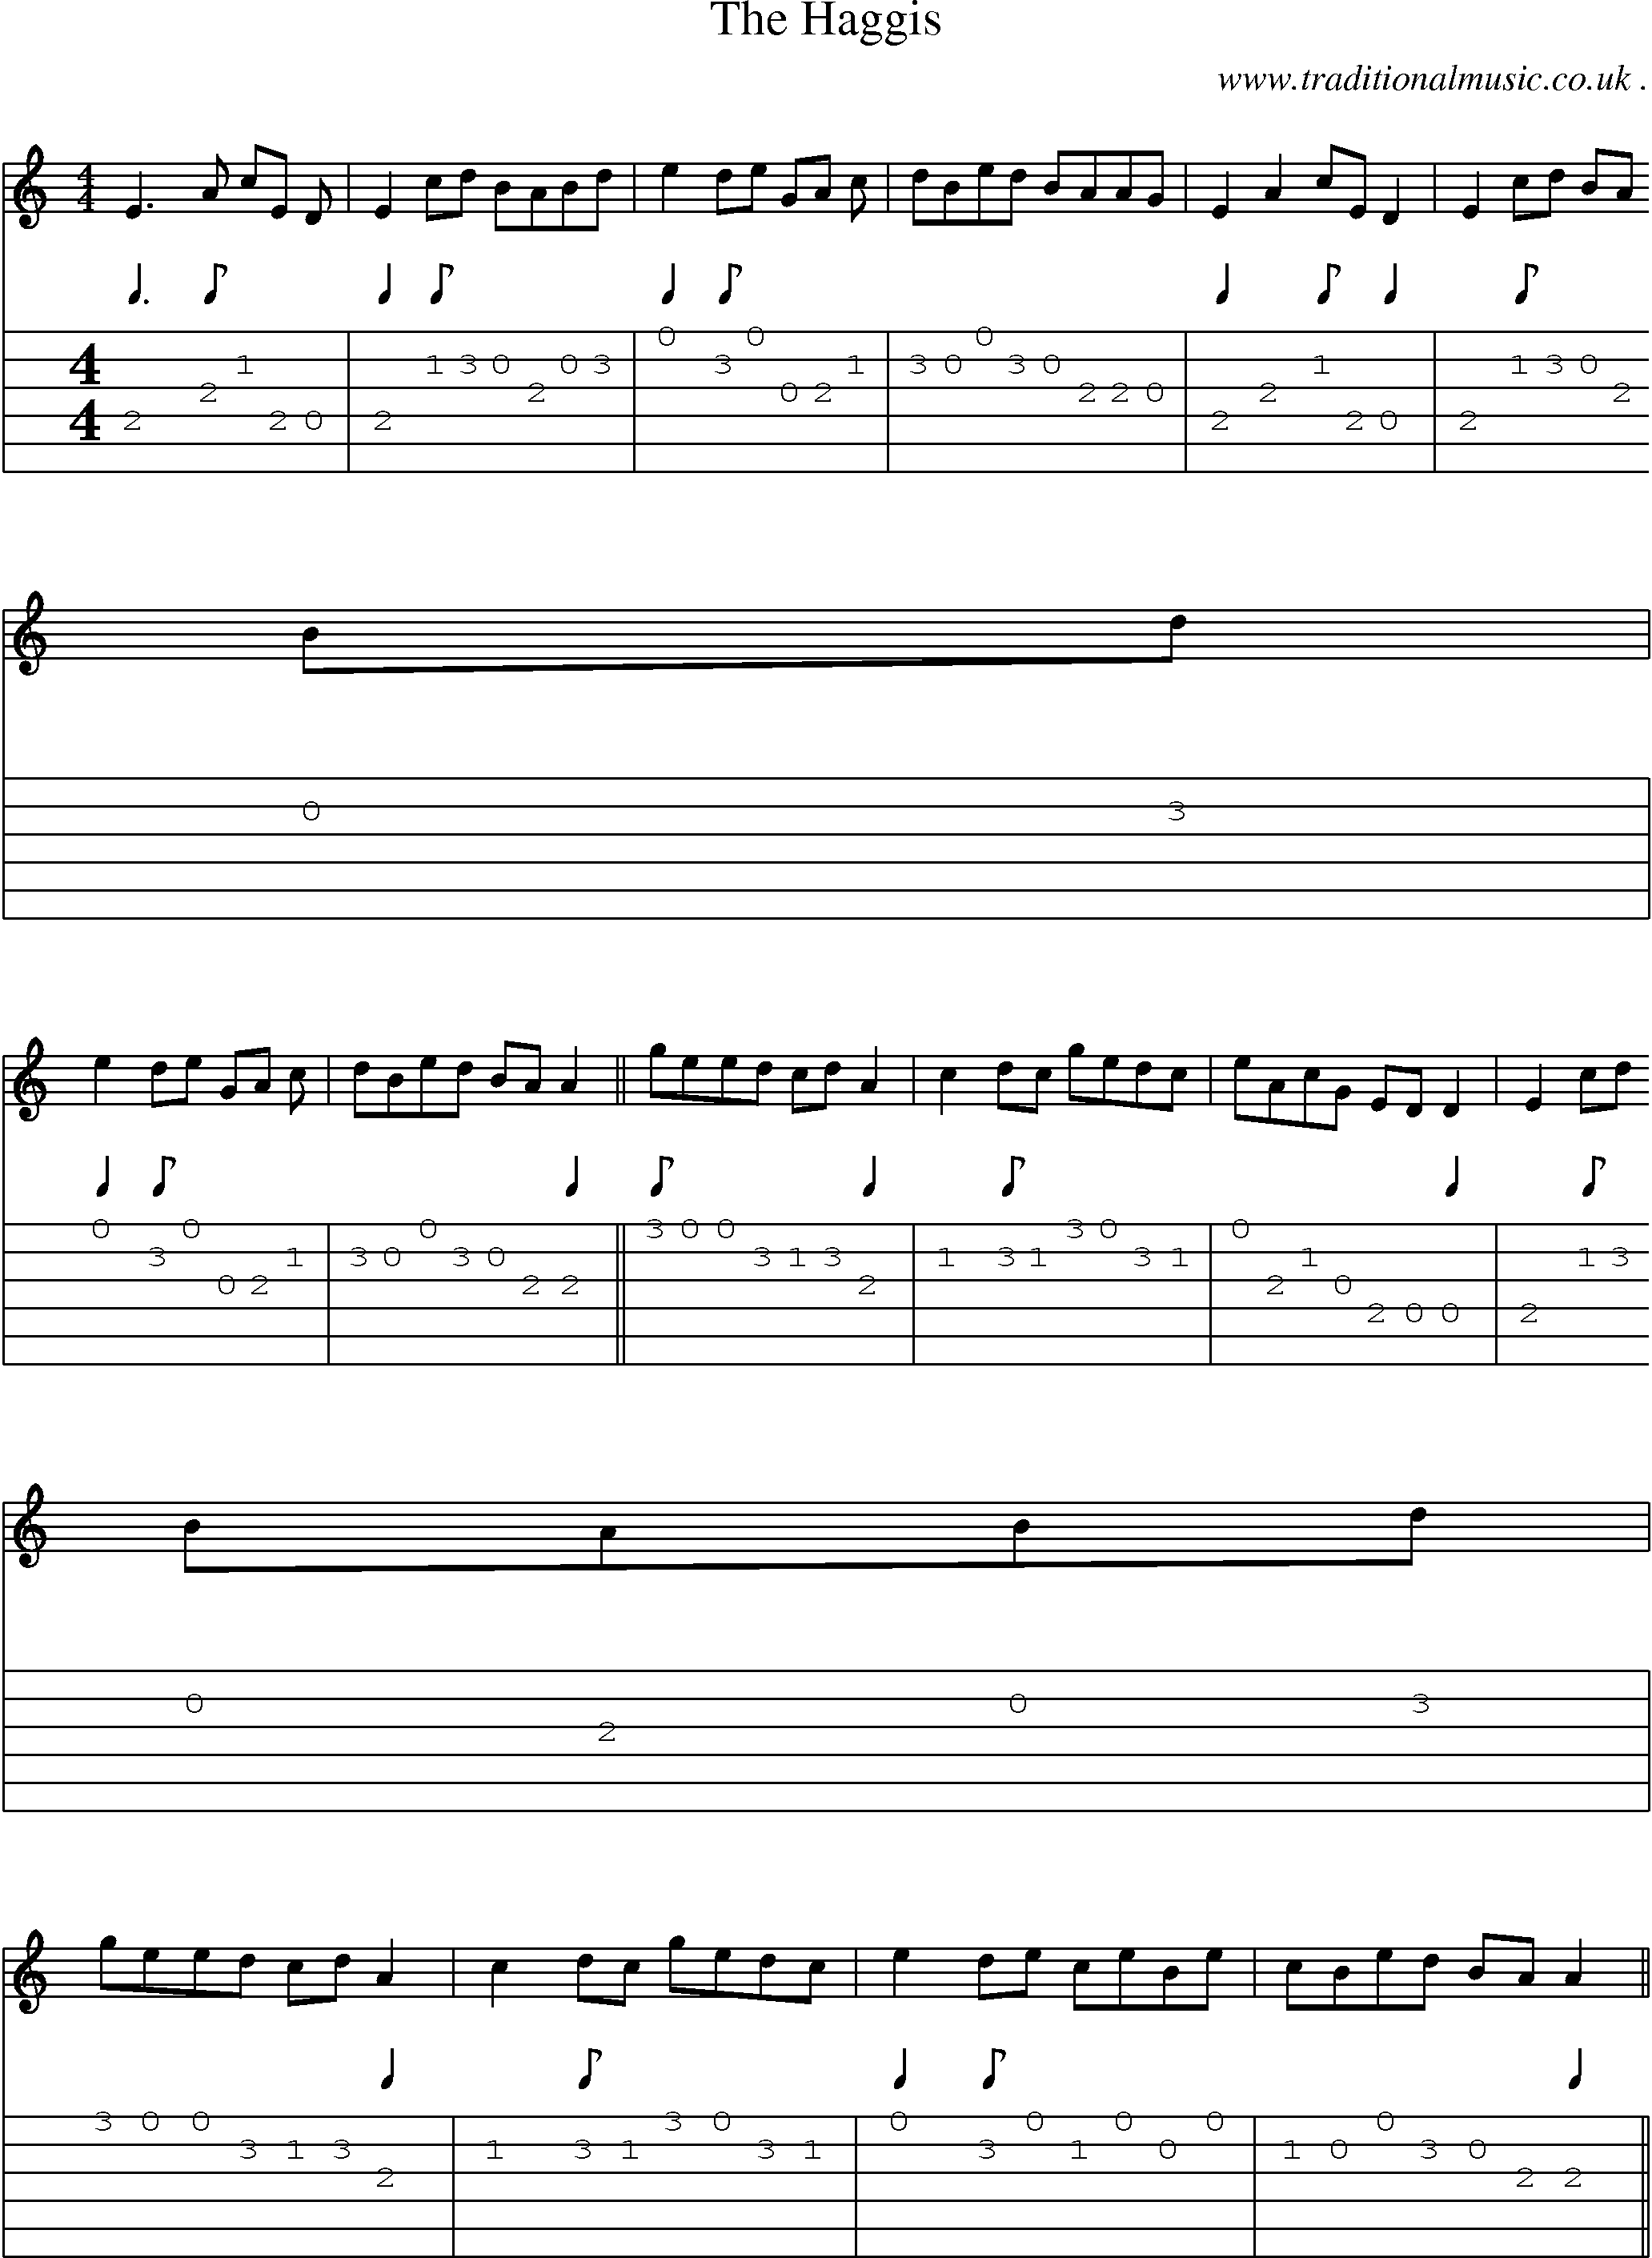 Sheet-Music and Guitar Tabs for The Haggis